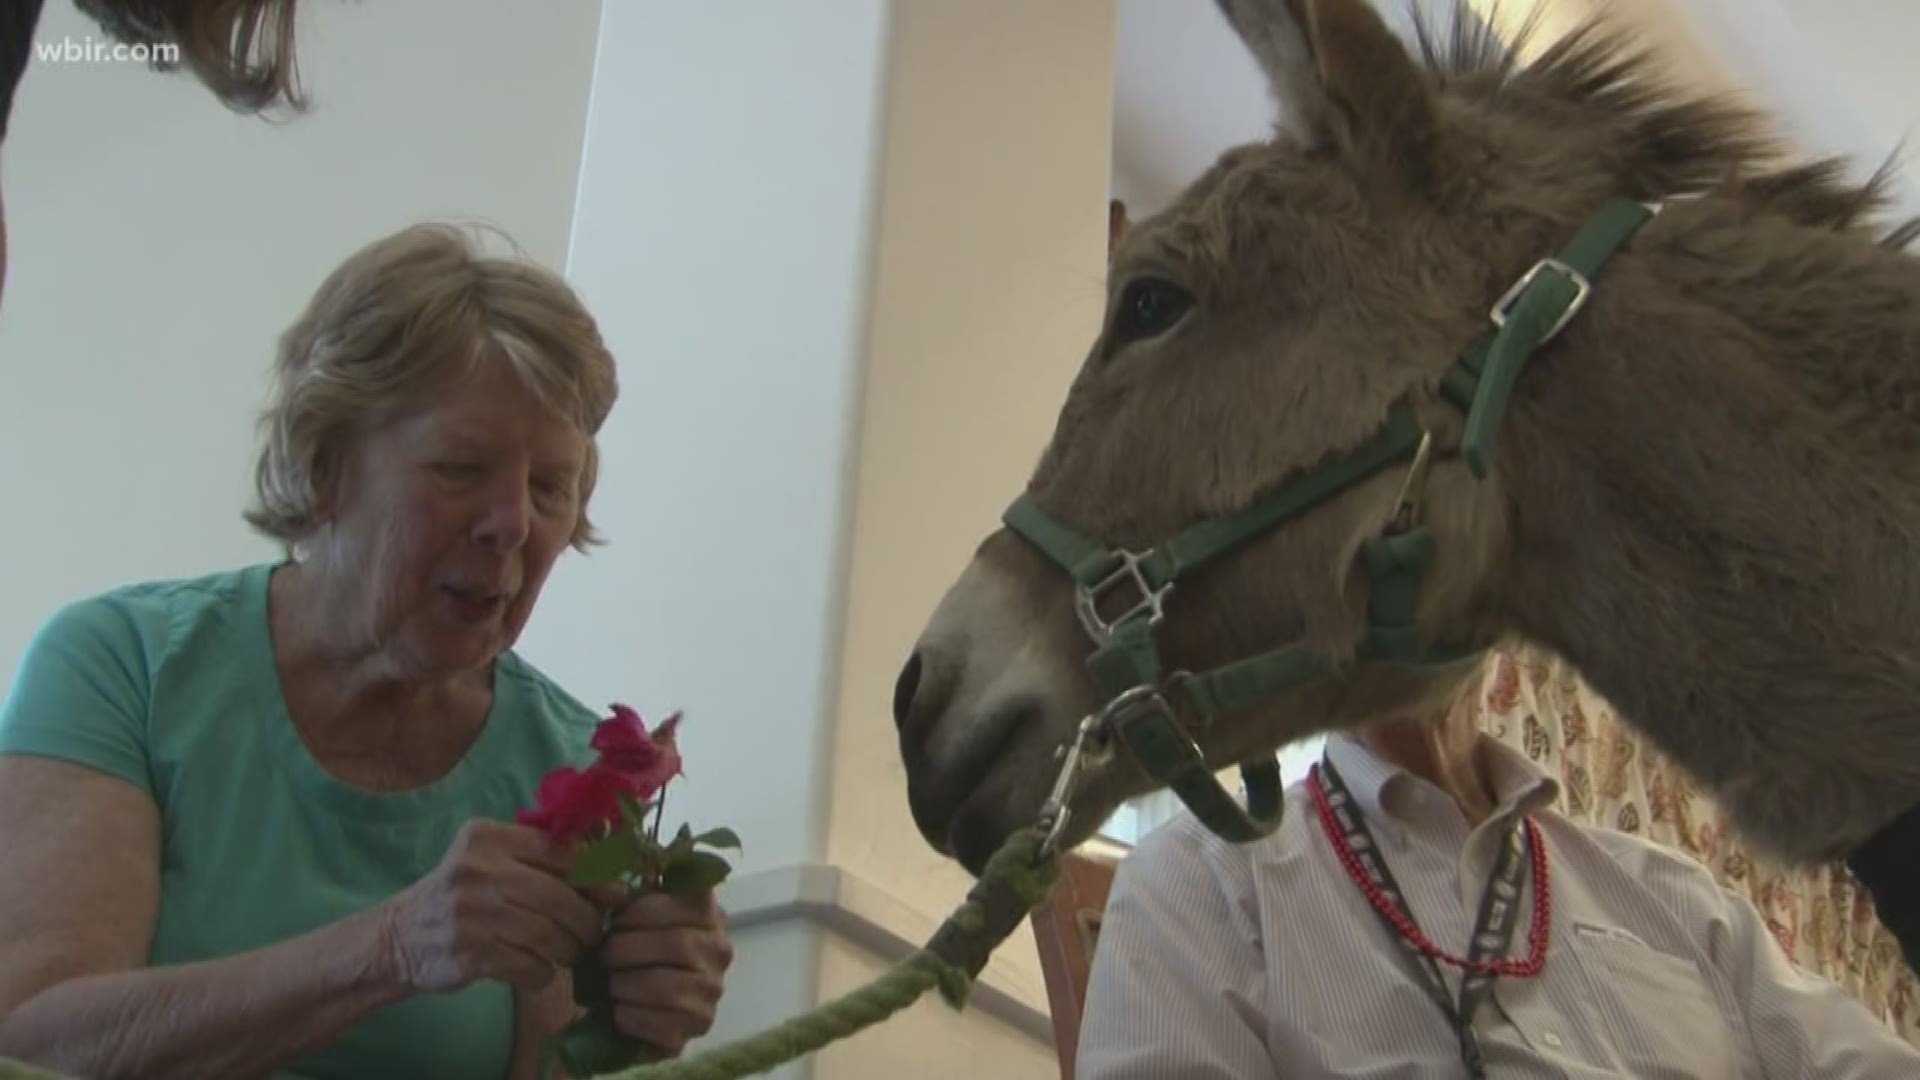 It's hard not to smile when you see mini horses and donkeys.	So when they waltzed into an assisted living facility today, the residents had the same reaction.